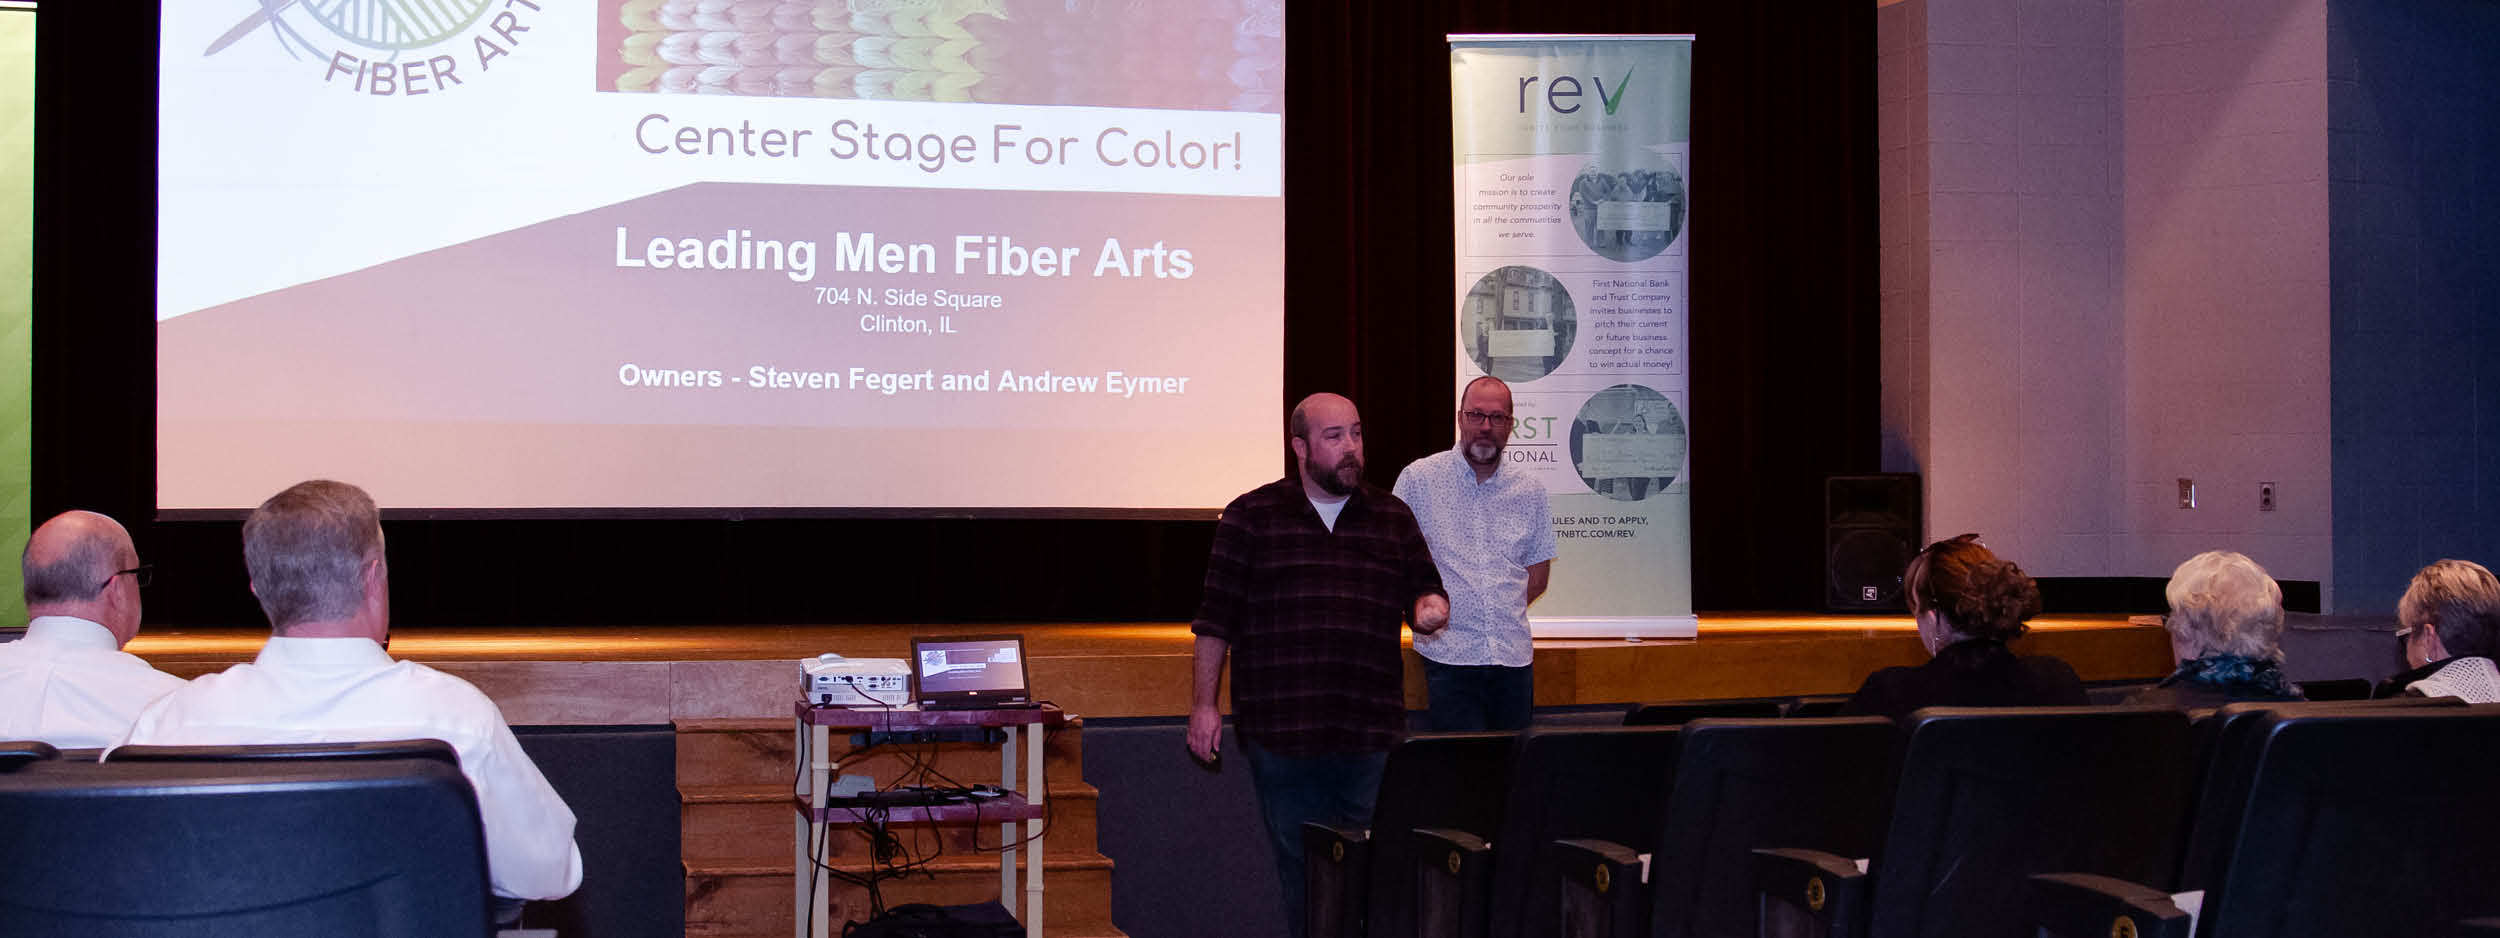 Andy and Steve with Leading Men Fiber Arts pitching 